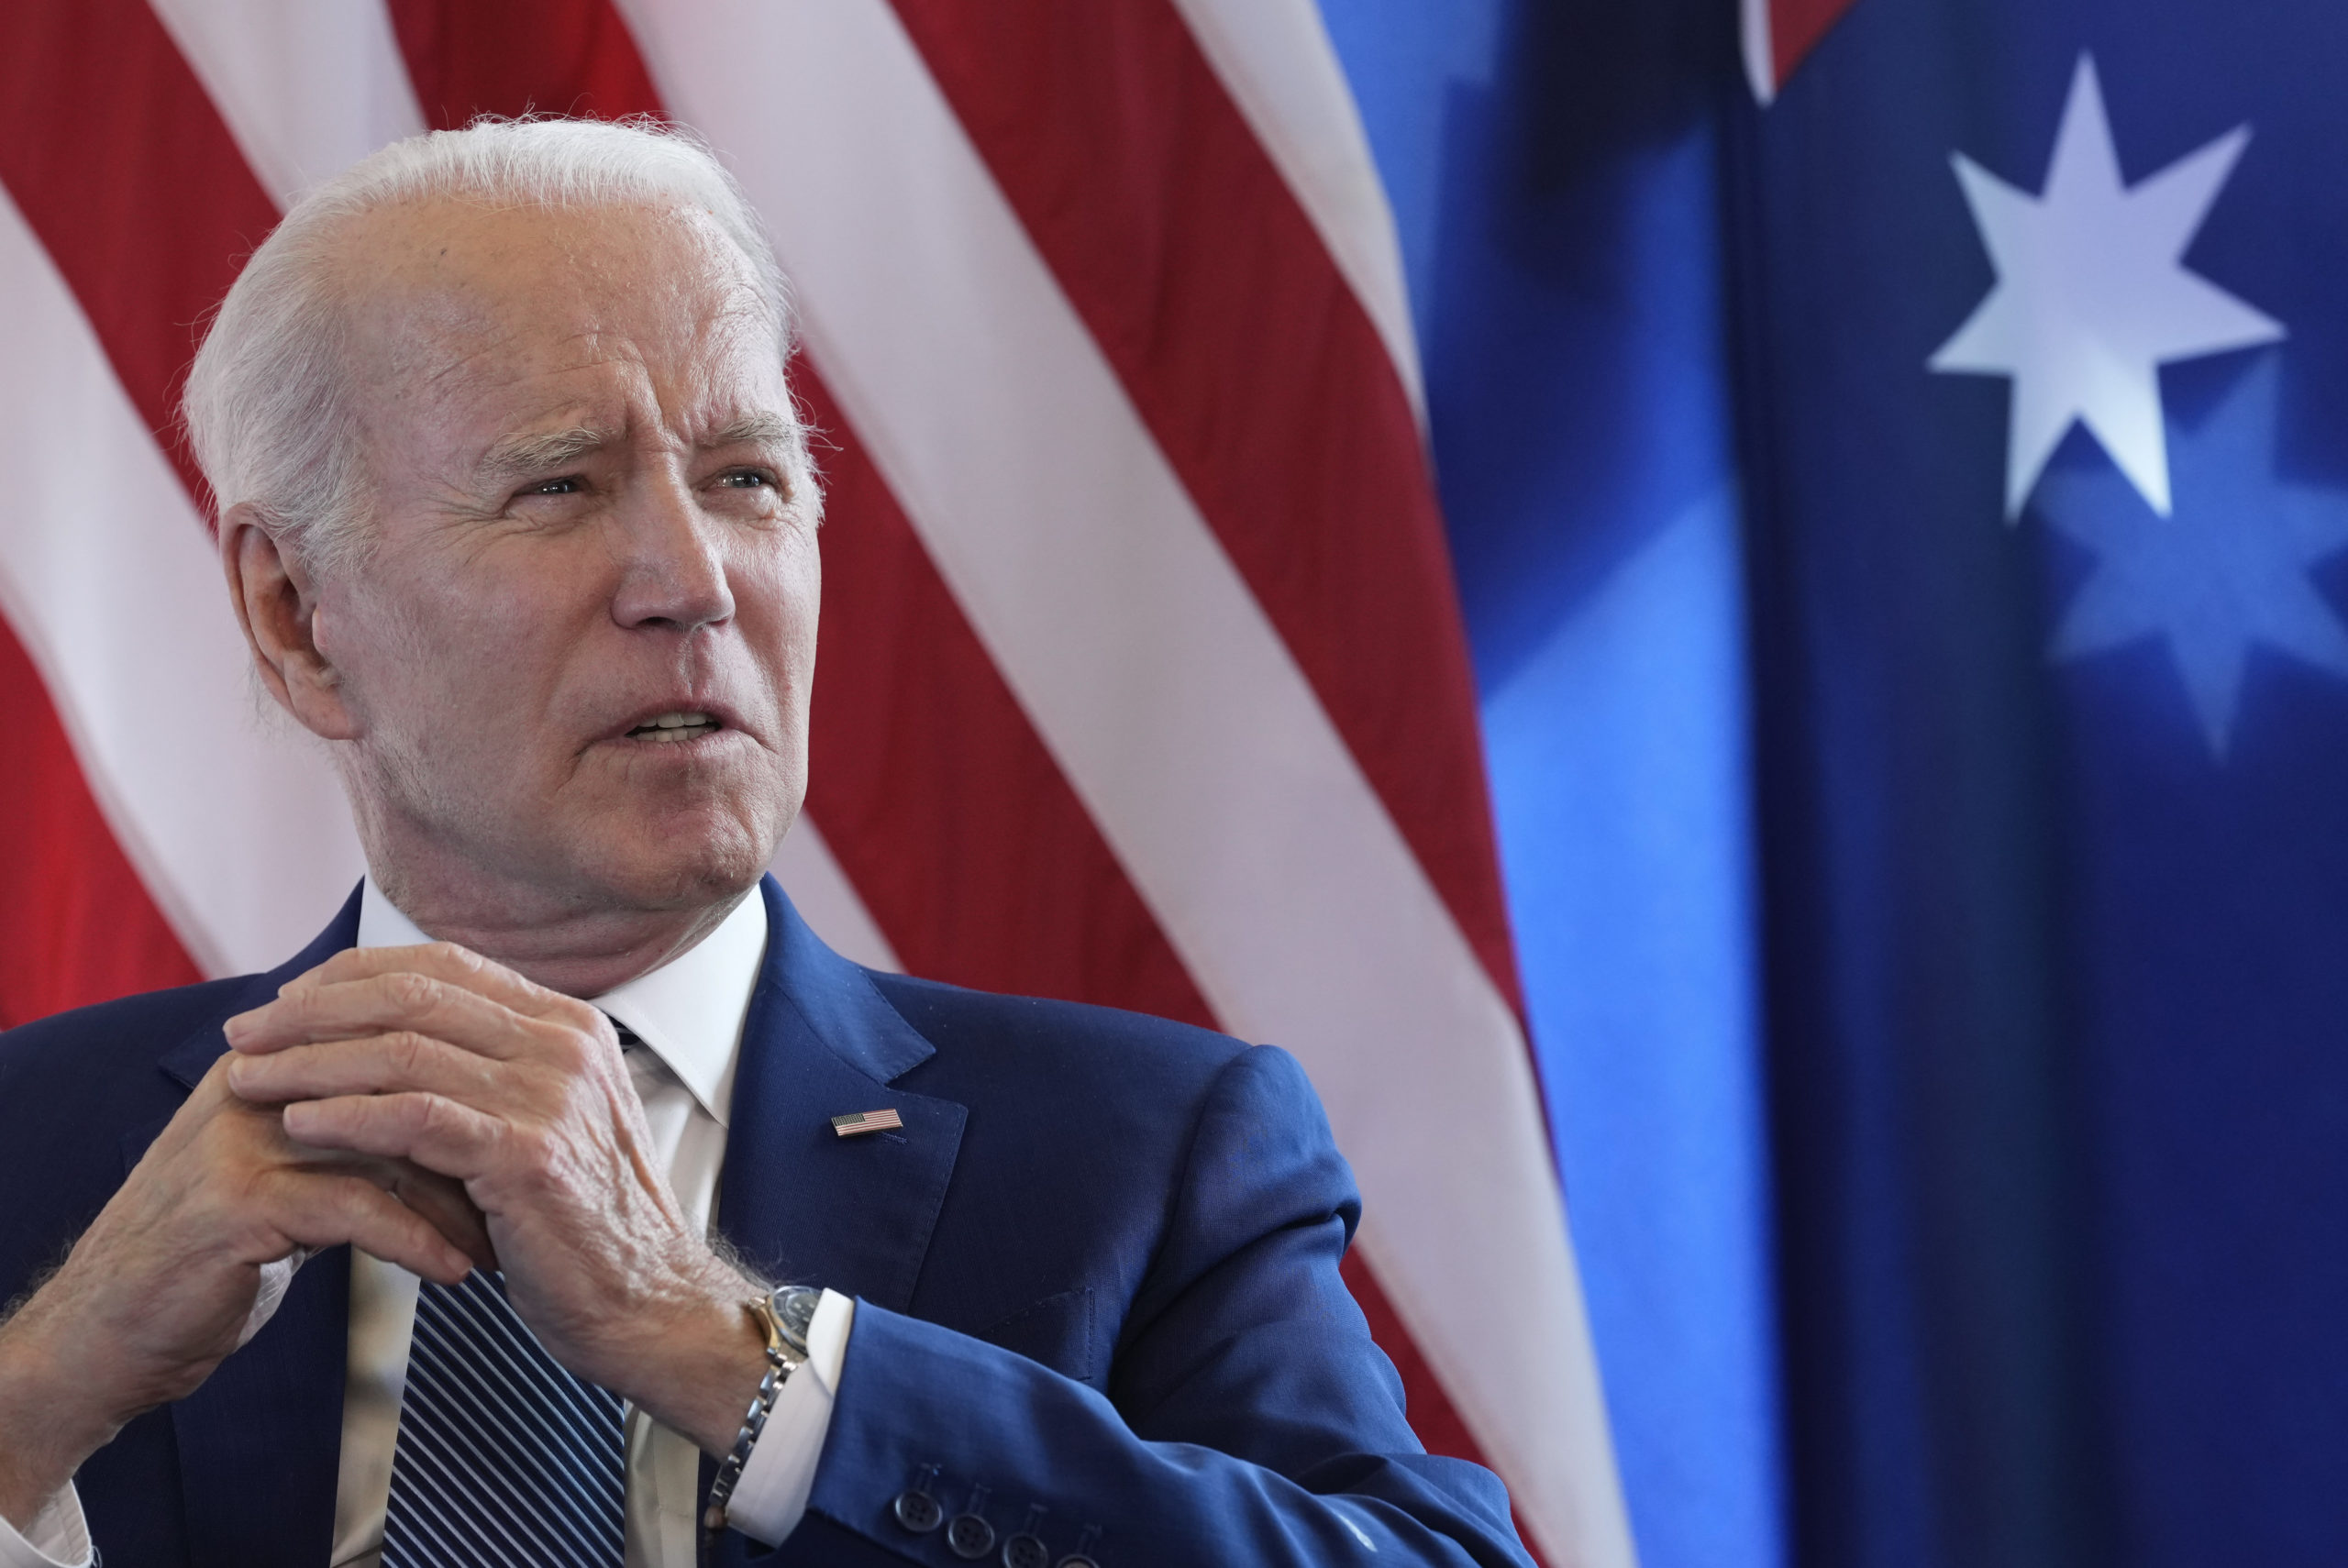 President Joe Biden answers questions on the U.S. debt limits ahead of a bilateral meeting with Australia's Prime Minister Anthony Albanese on the sidelines of the G7 Summit in Hiroshima, Japan, on Saturday.